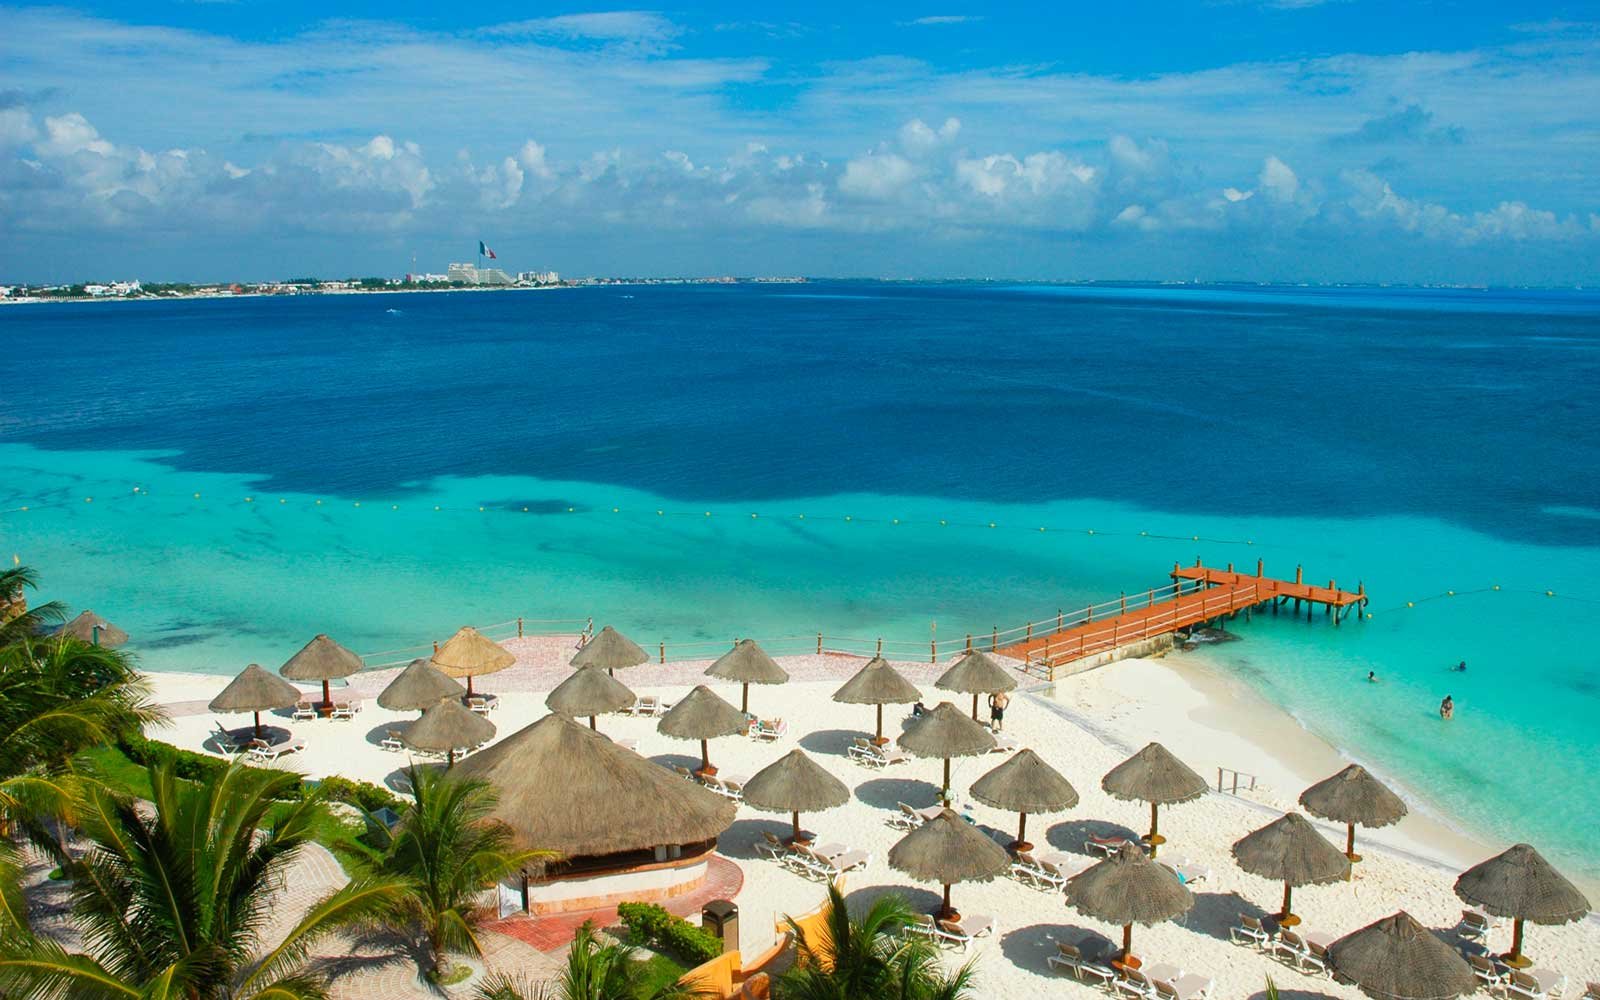 New Jersey to Cancun Mexico $204 RT Nonstop Airfares on Frontier Airlines (Travel August - October 2021)